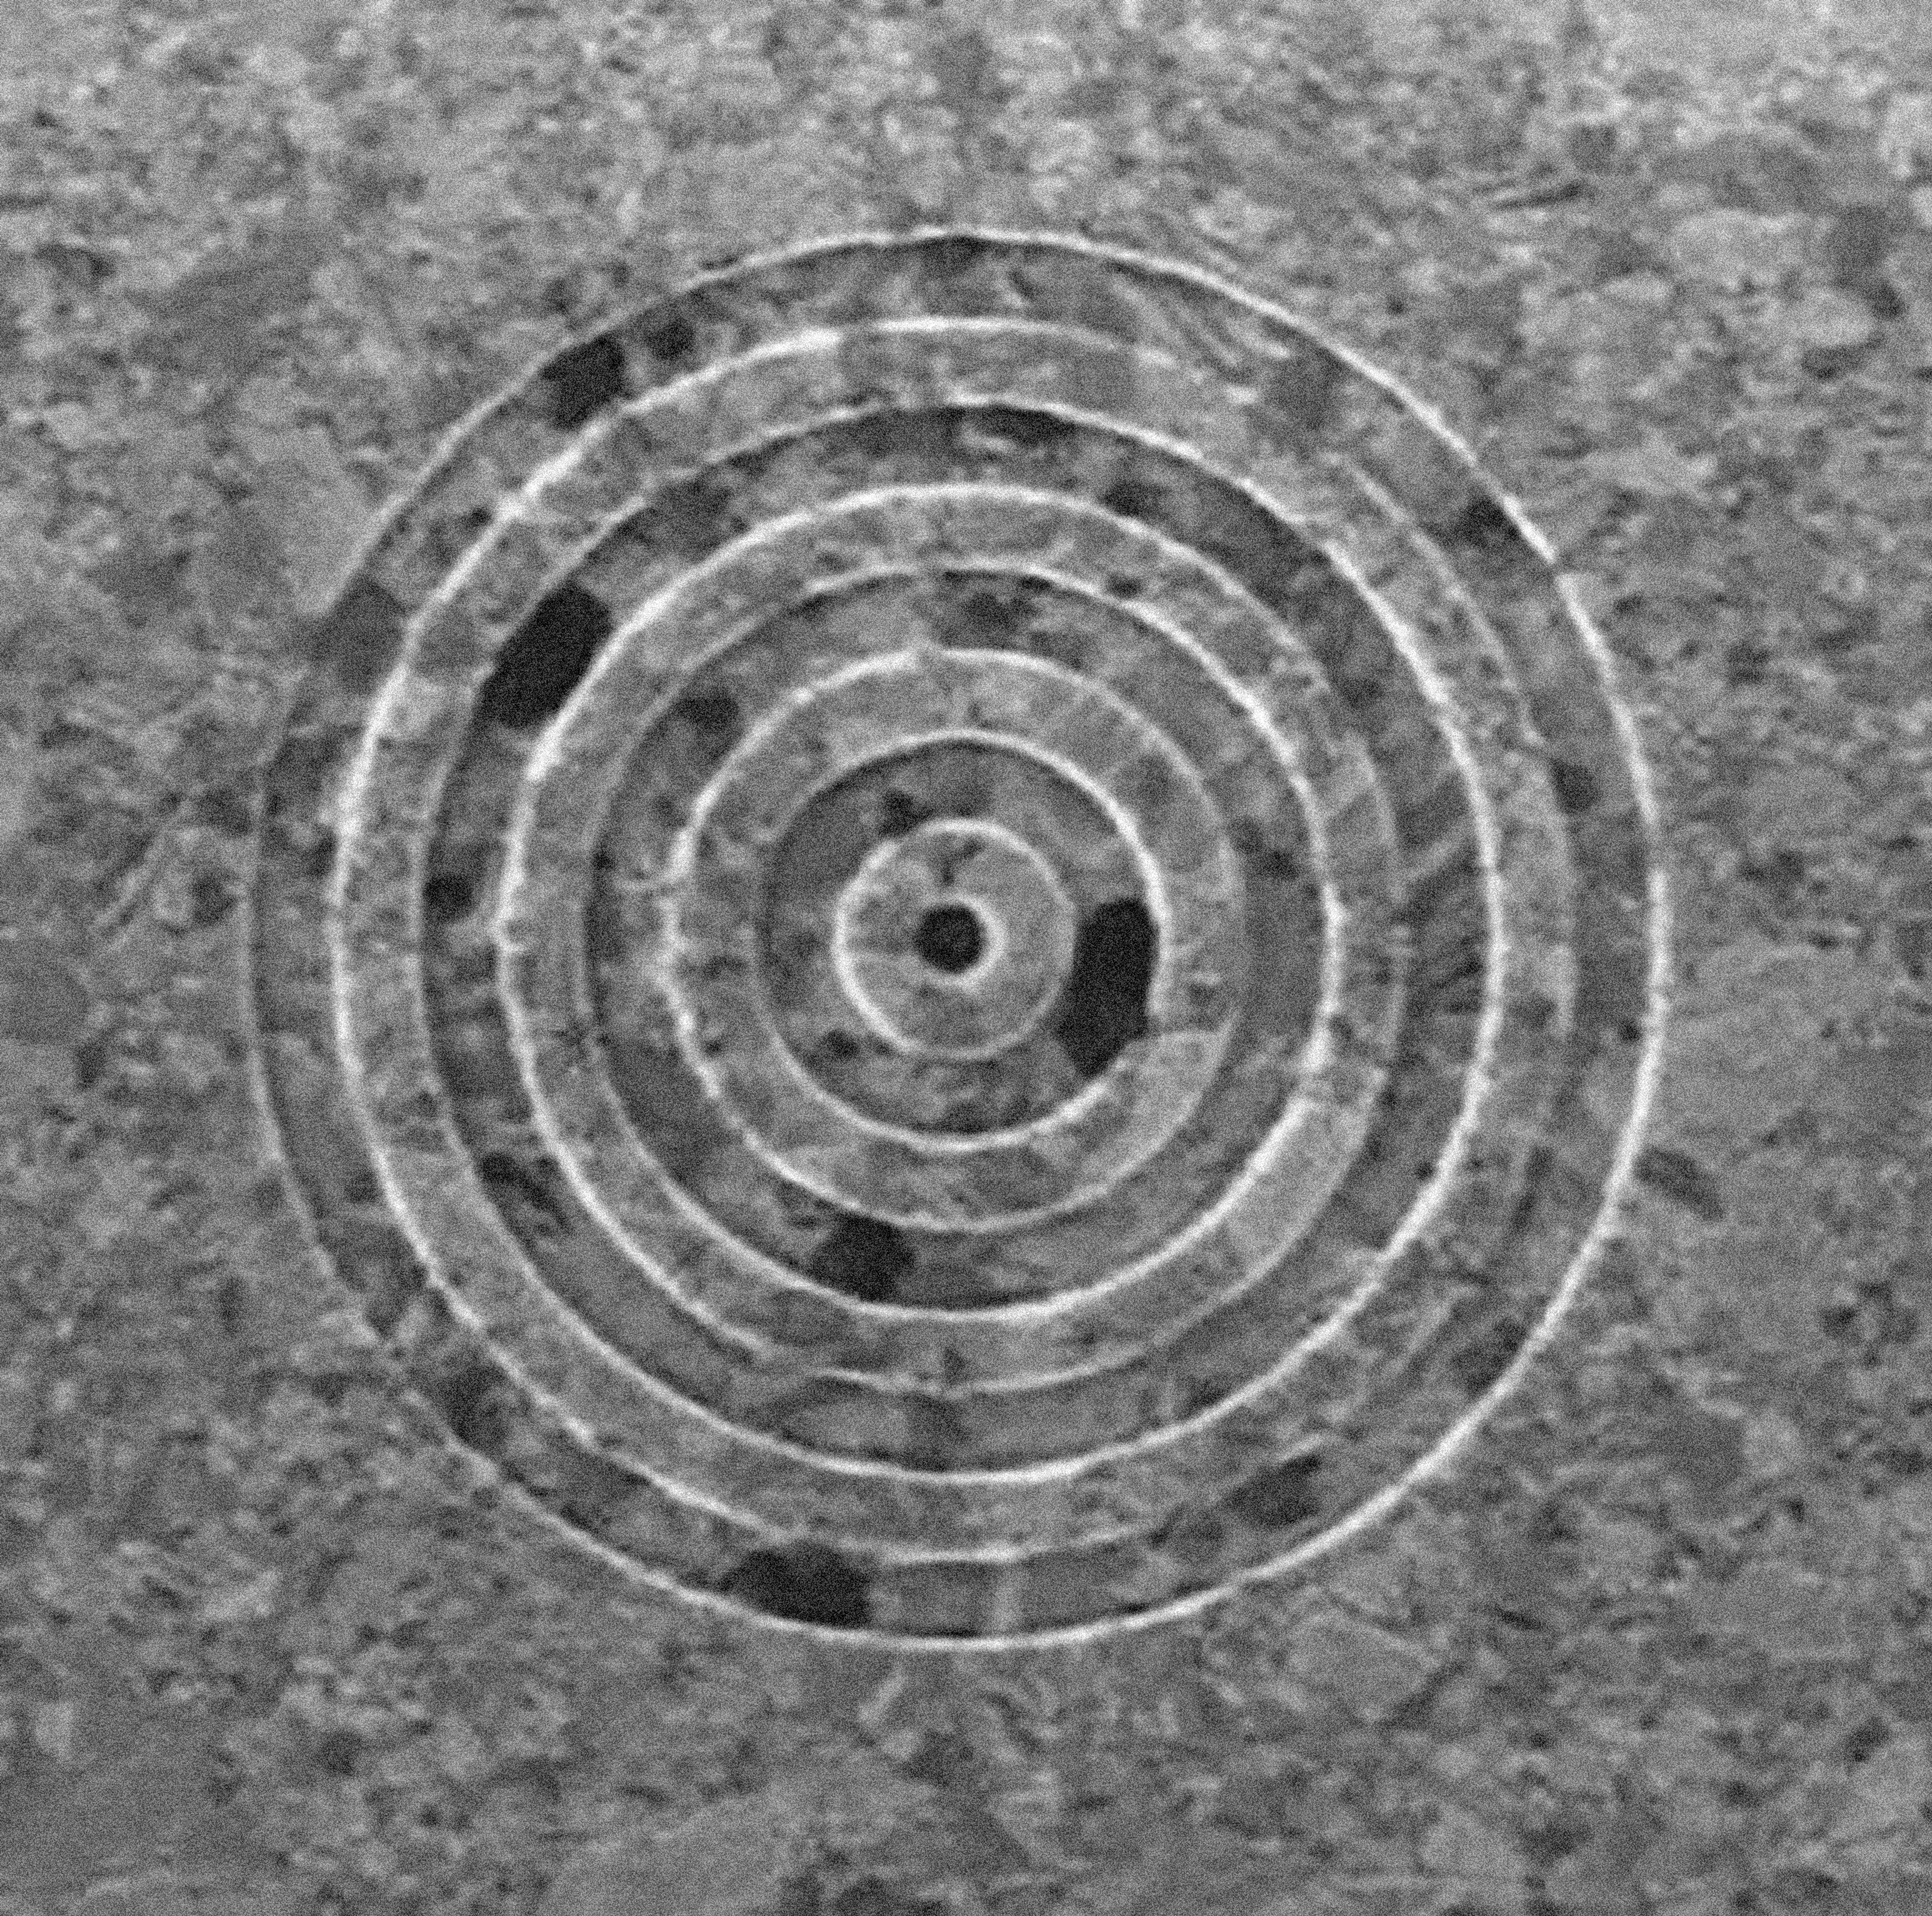 Focused ion beam micrograph image of the bull’s eye structure on a 300 nm-thick silver film used to demonstrated transmission through a subwavelength hole.